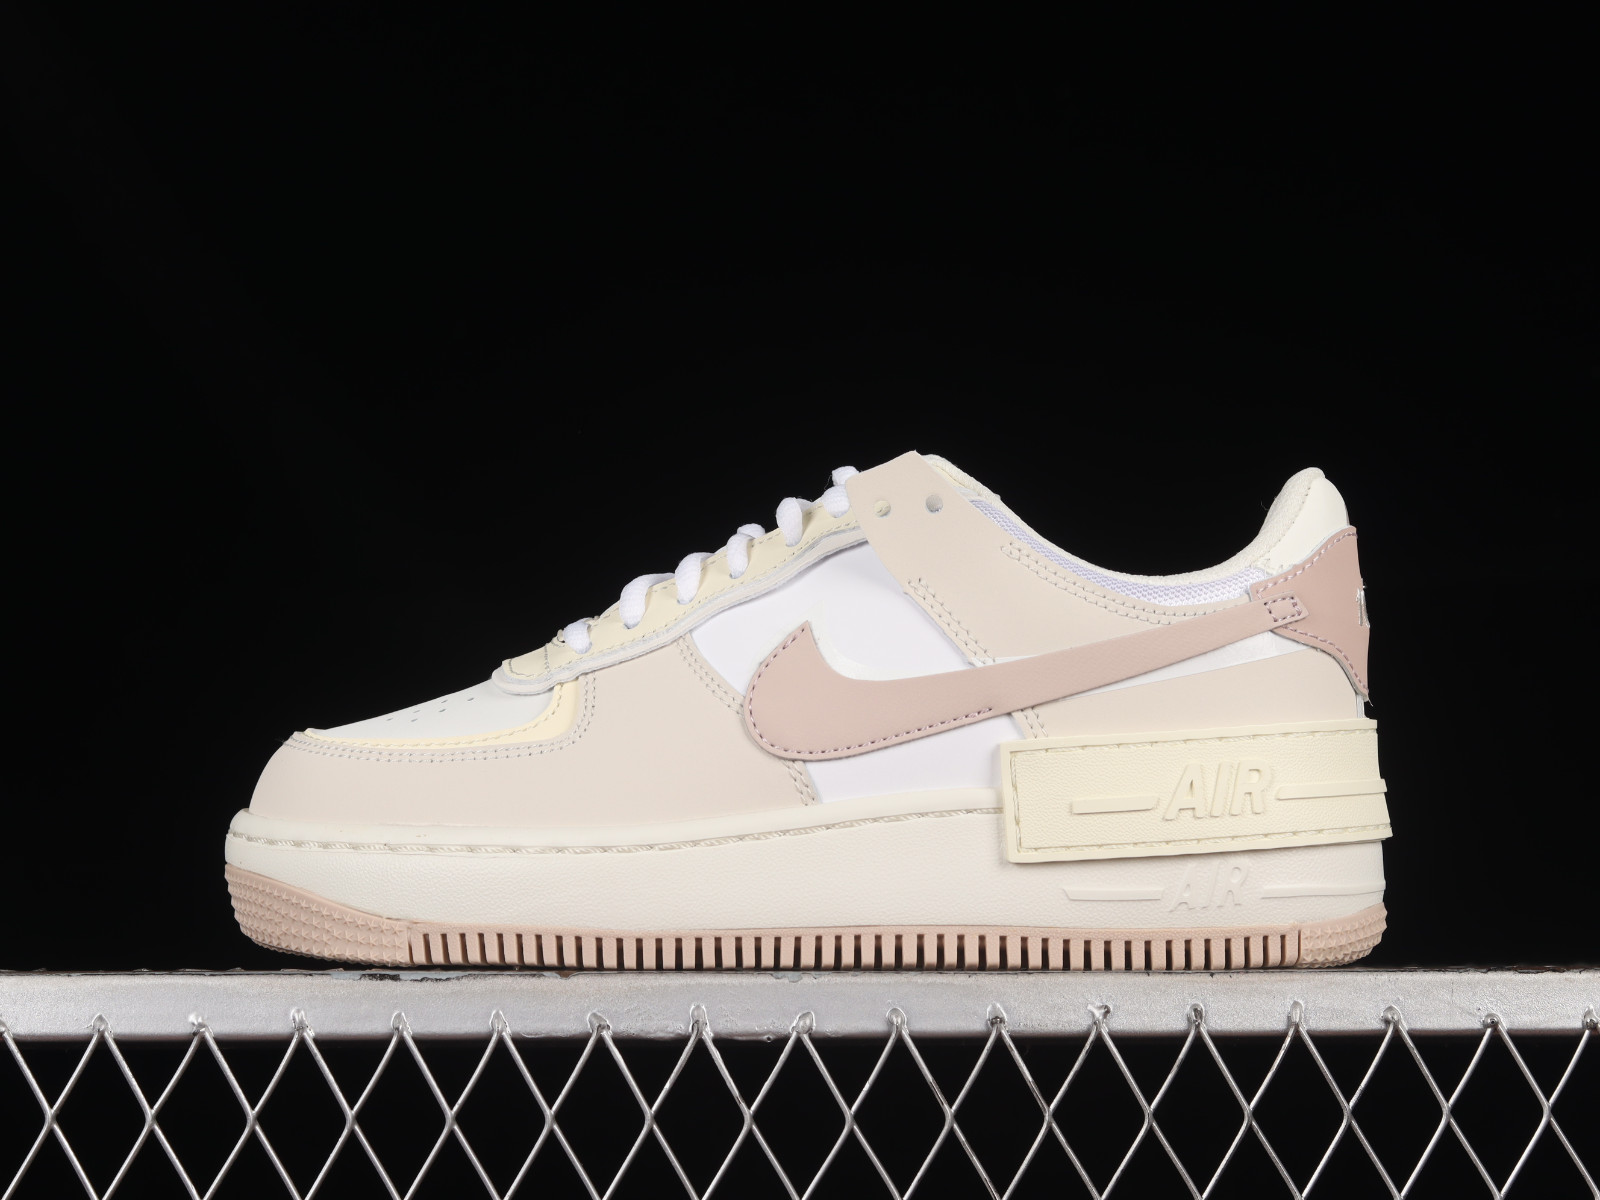 121 - MultiscaleconsultingShops - retro nike waffle trainers for sale Nike Force 1 Low Shadow Cream Fossil Stone Sail FN3444